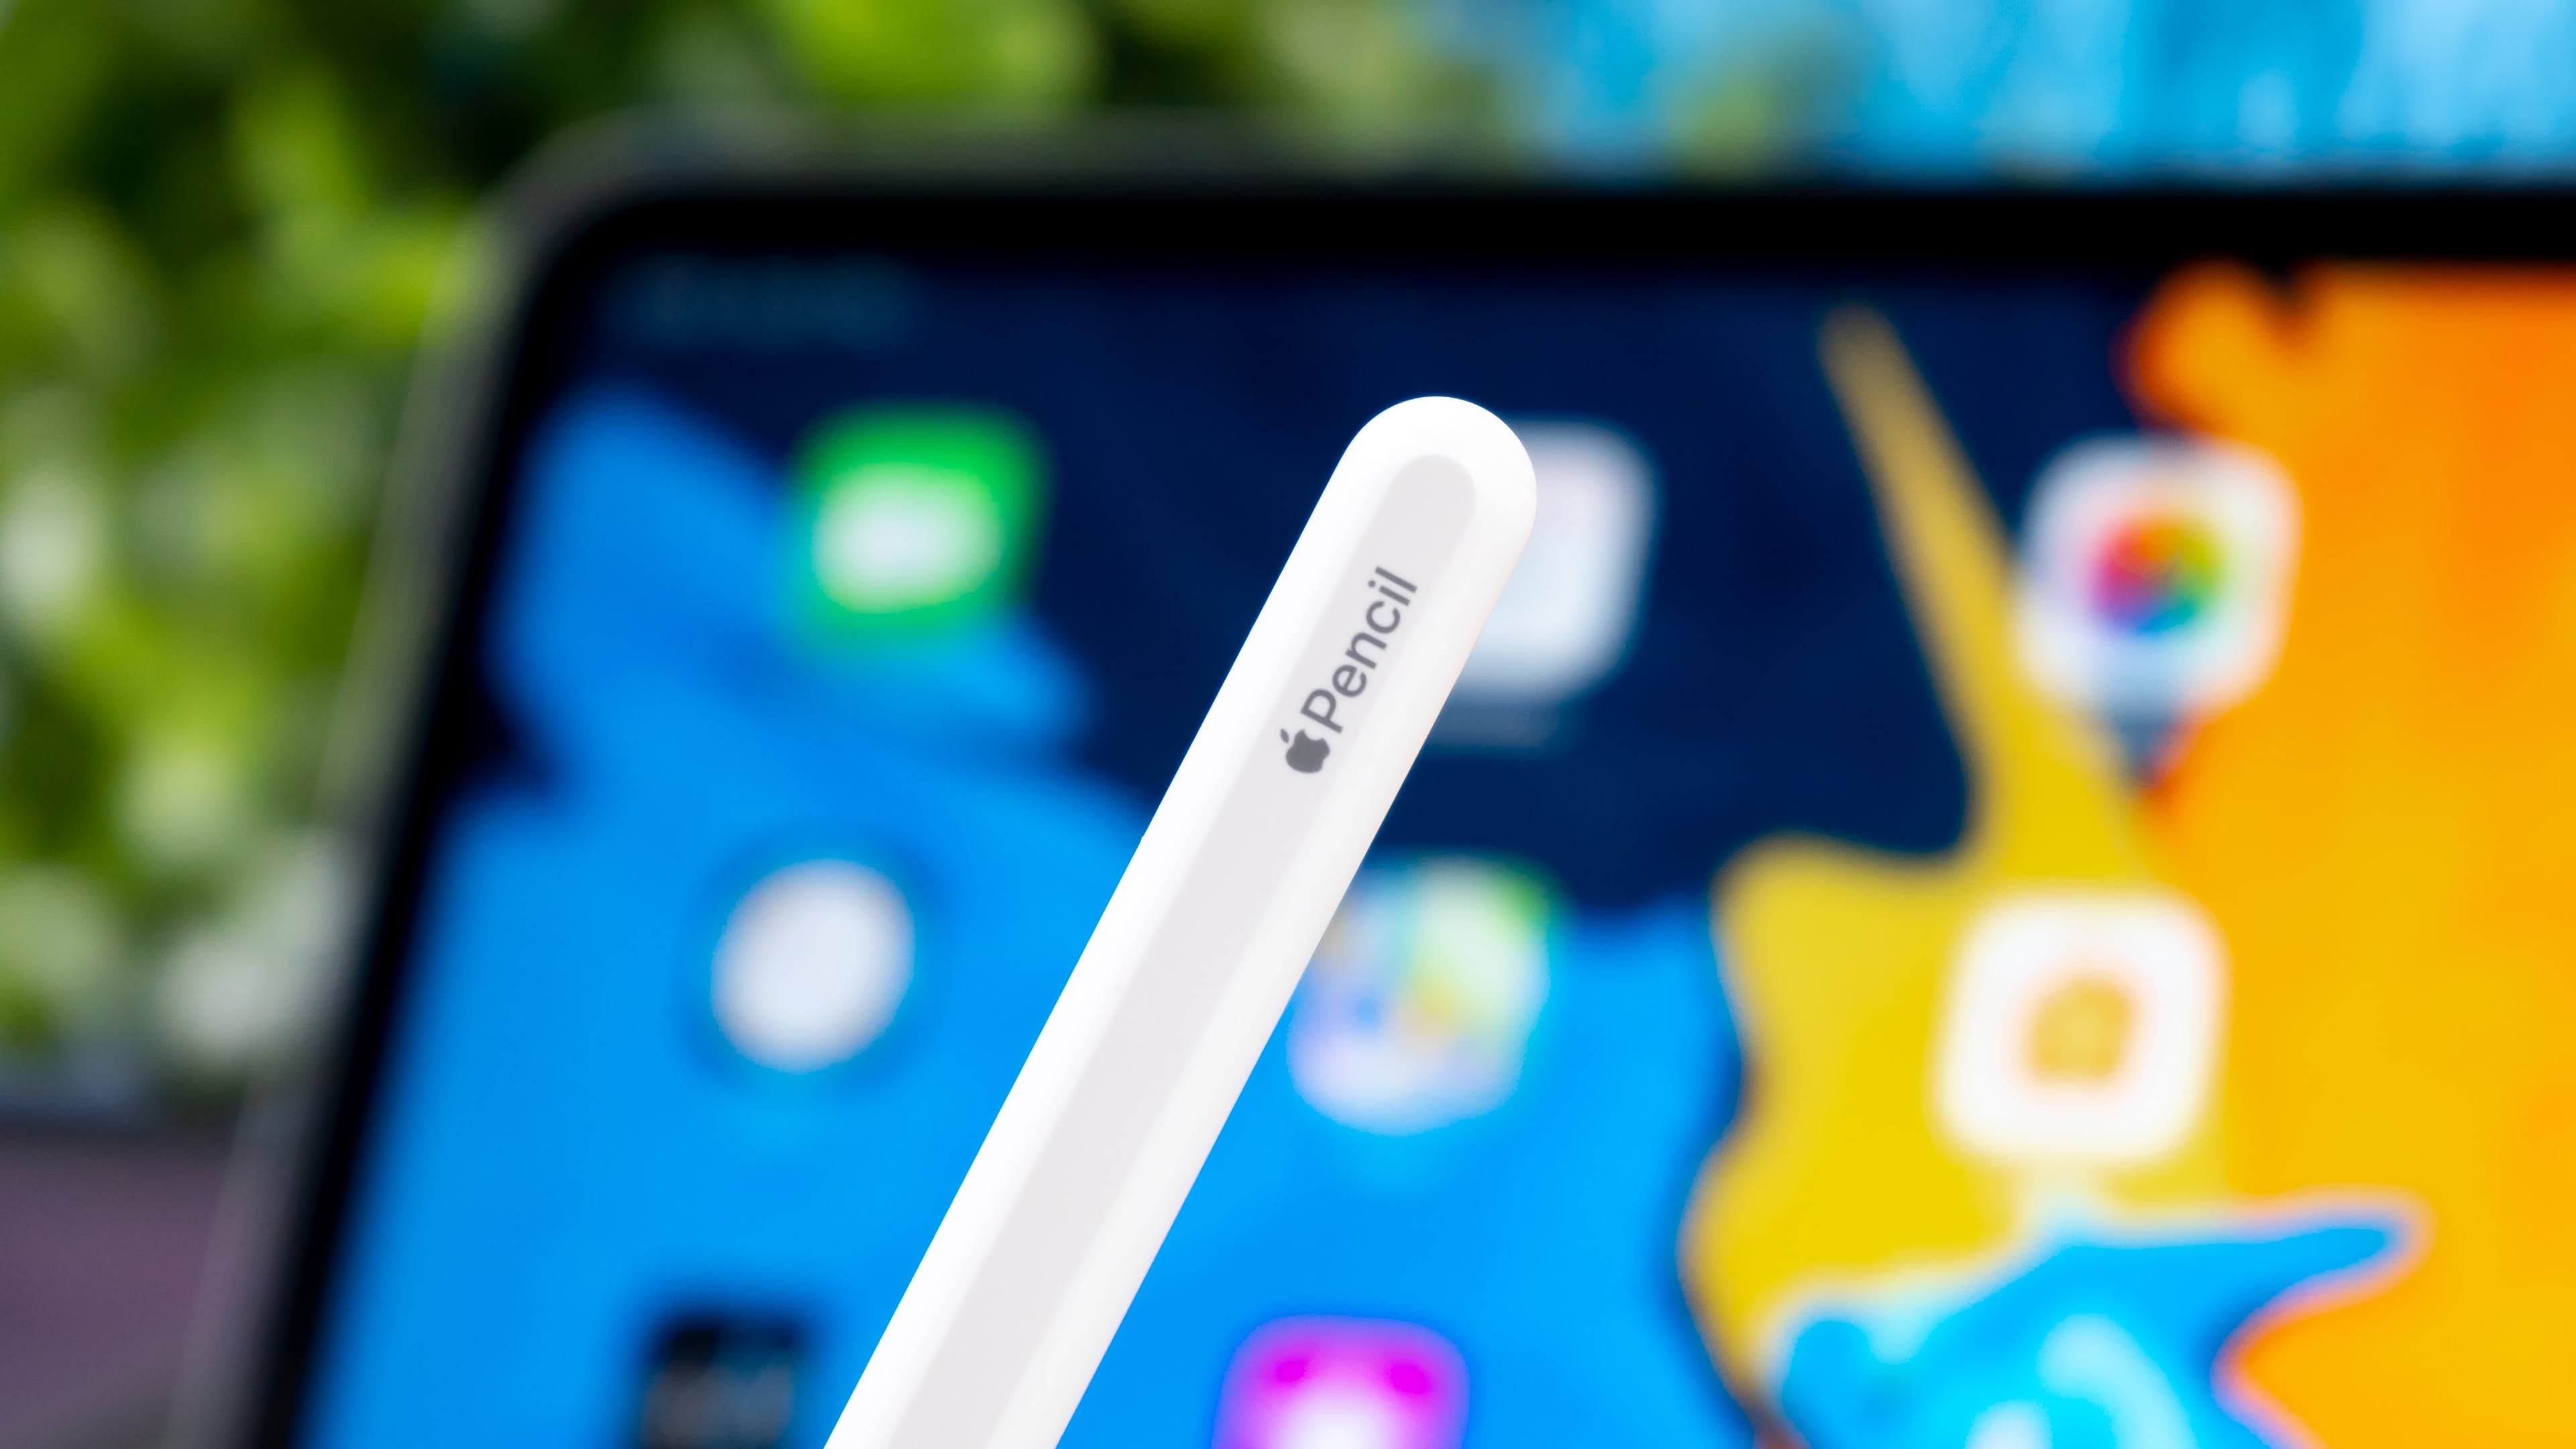 Closeup showcasing the end of Apple Pencil with branding, with a blurred iPad Pro in the background